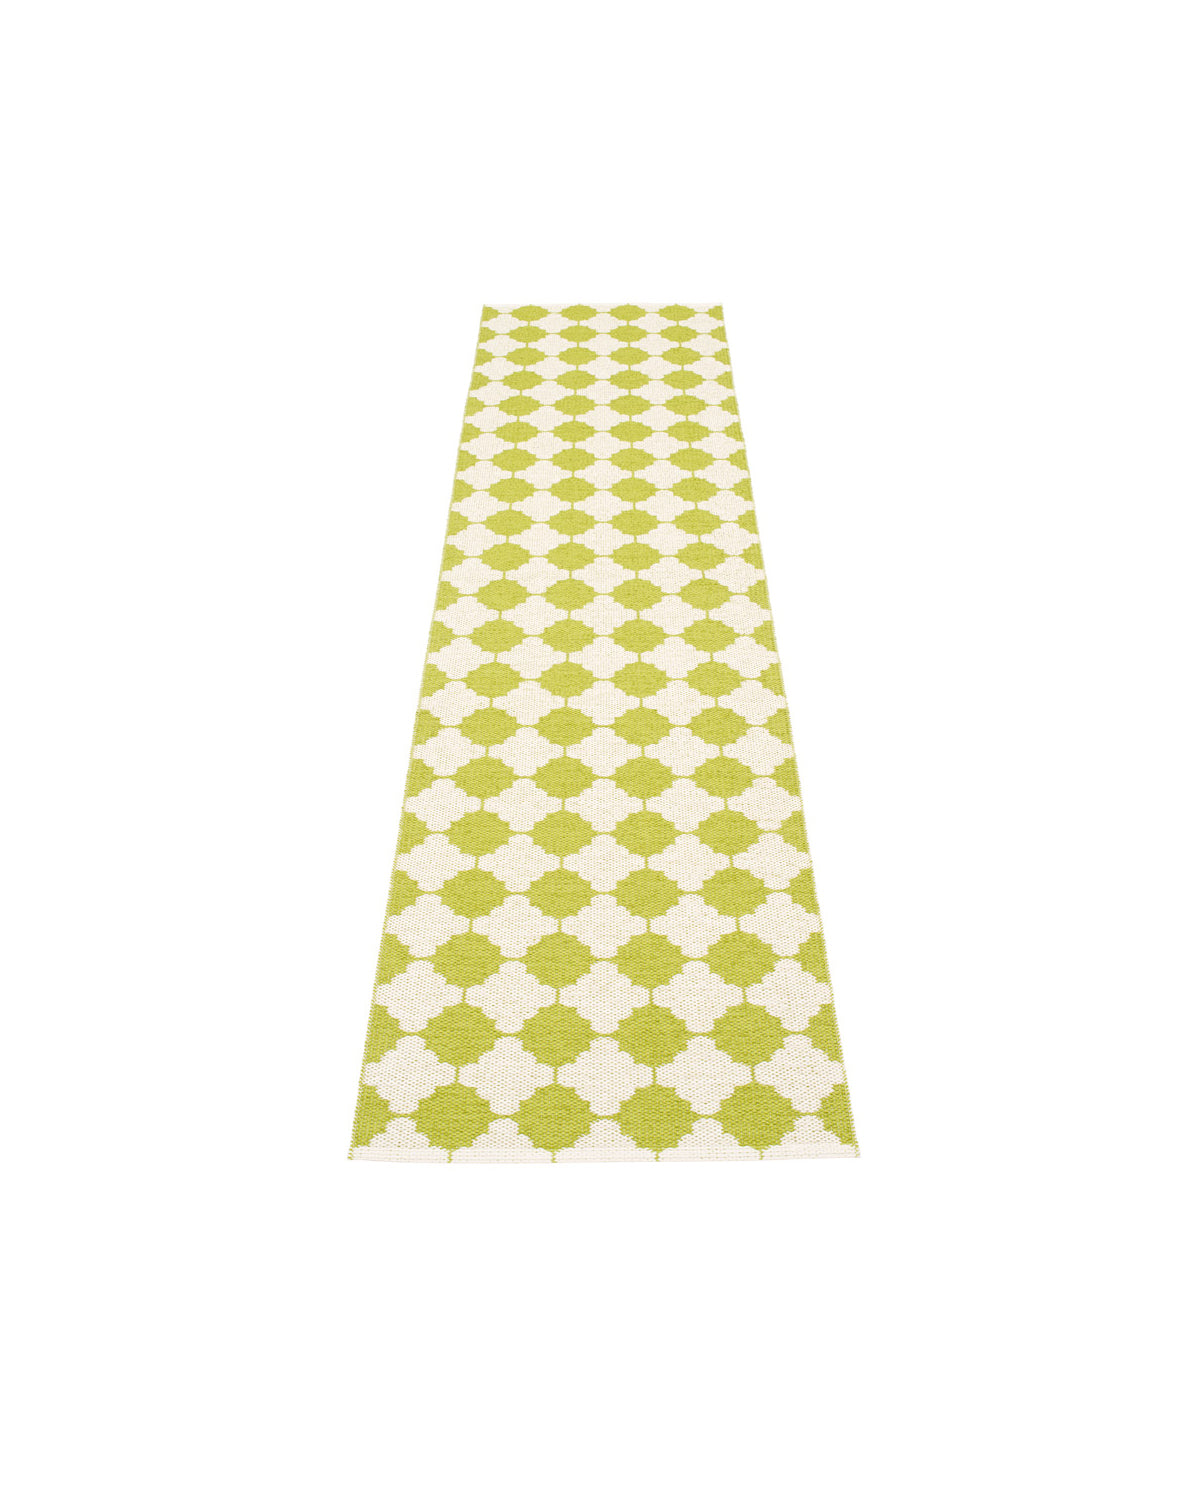 PappelinaPappelina Rug MARRE Lime 2.25 x 9.75 ft  image 2